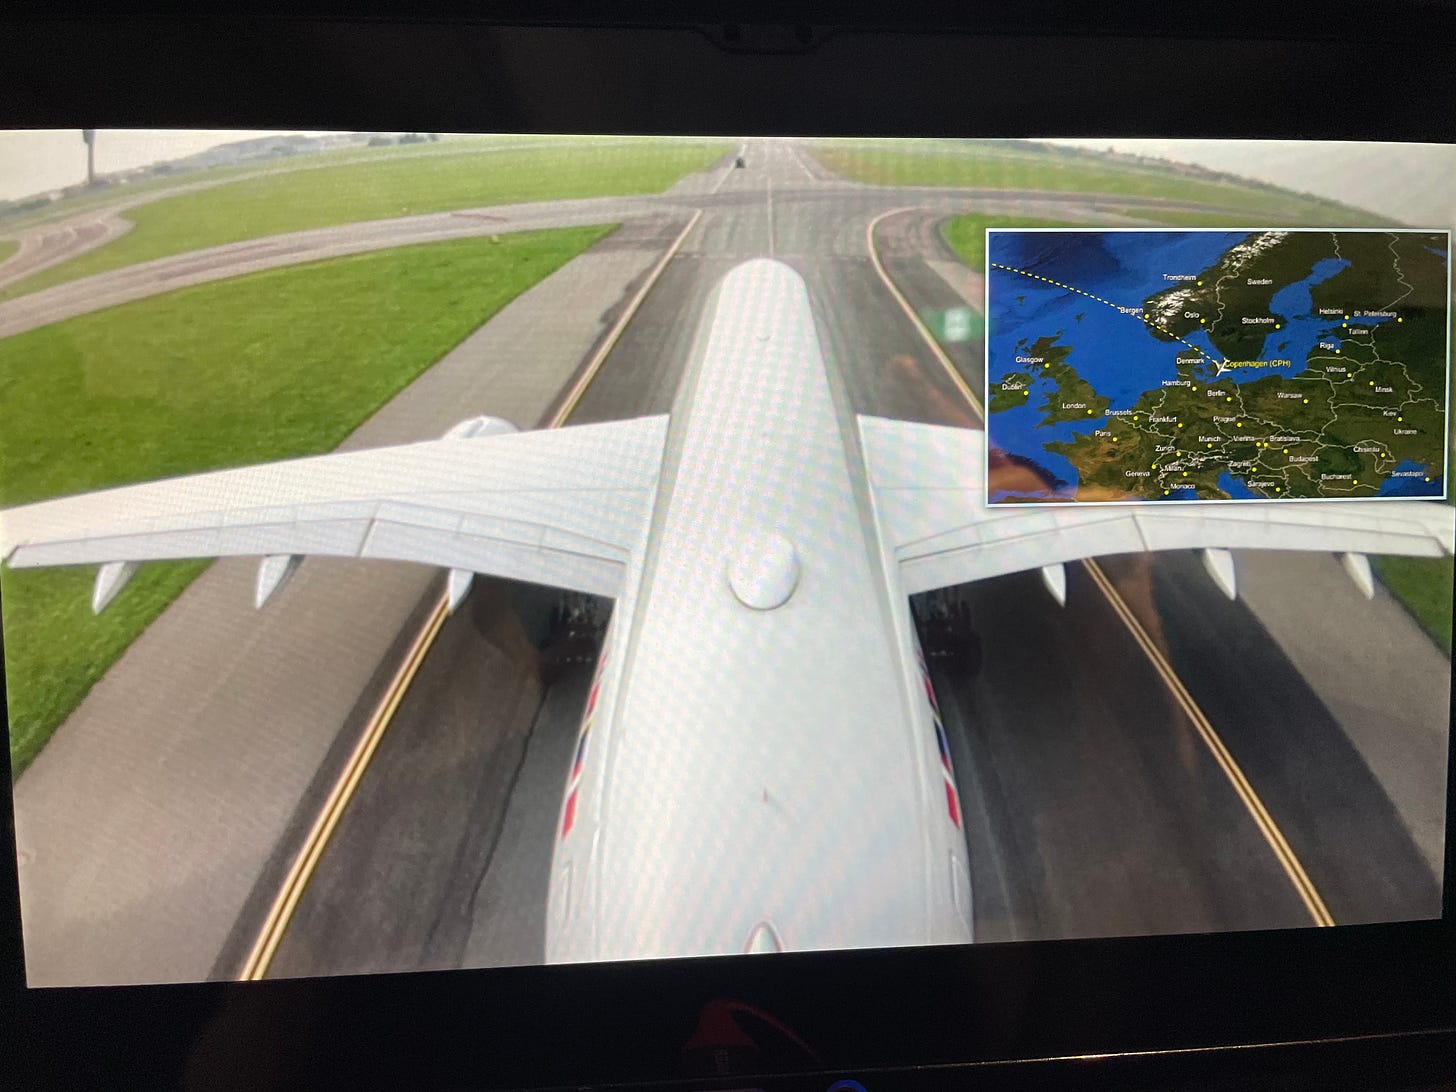 Tail camera view as SAS A350 taxis for take-off at CPH.